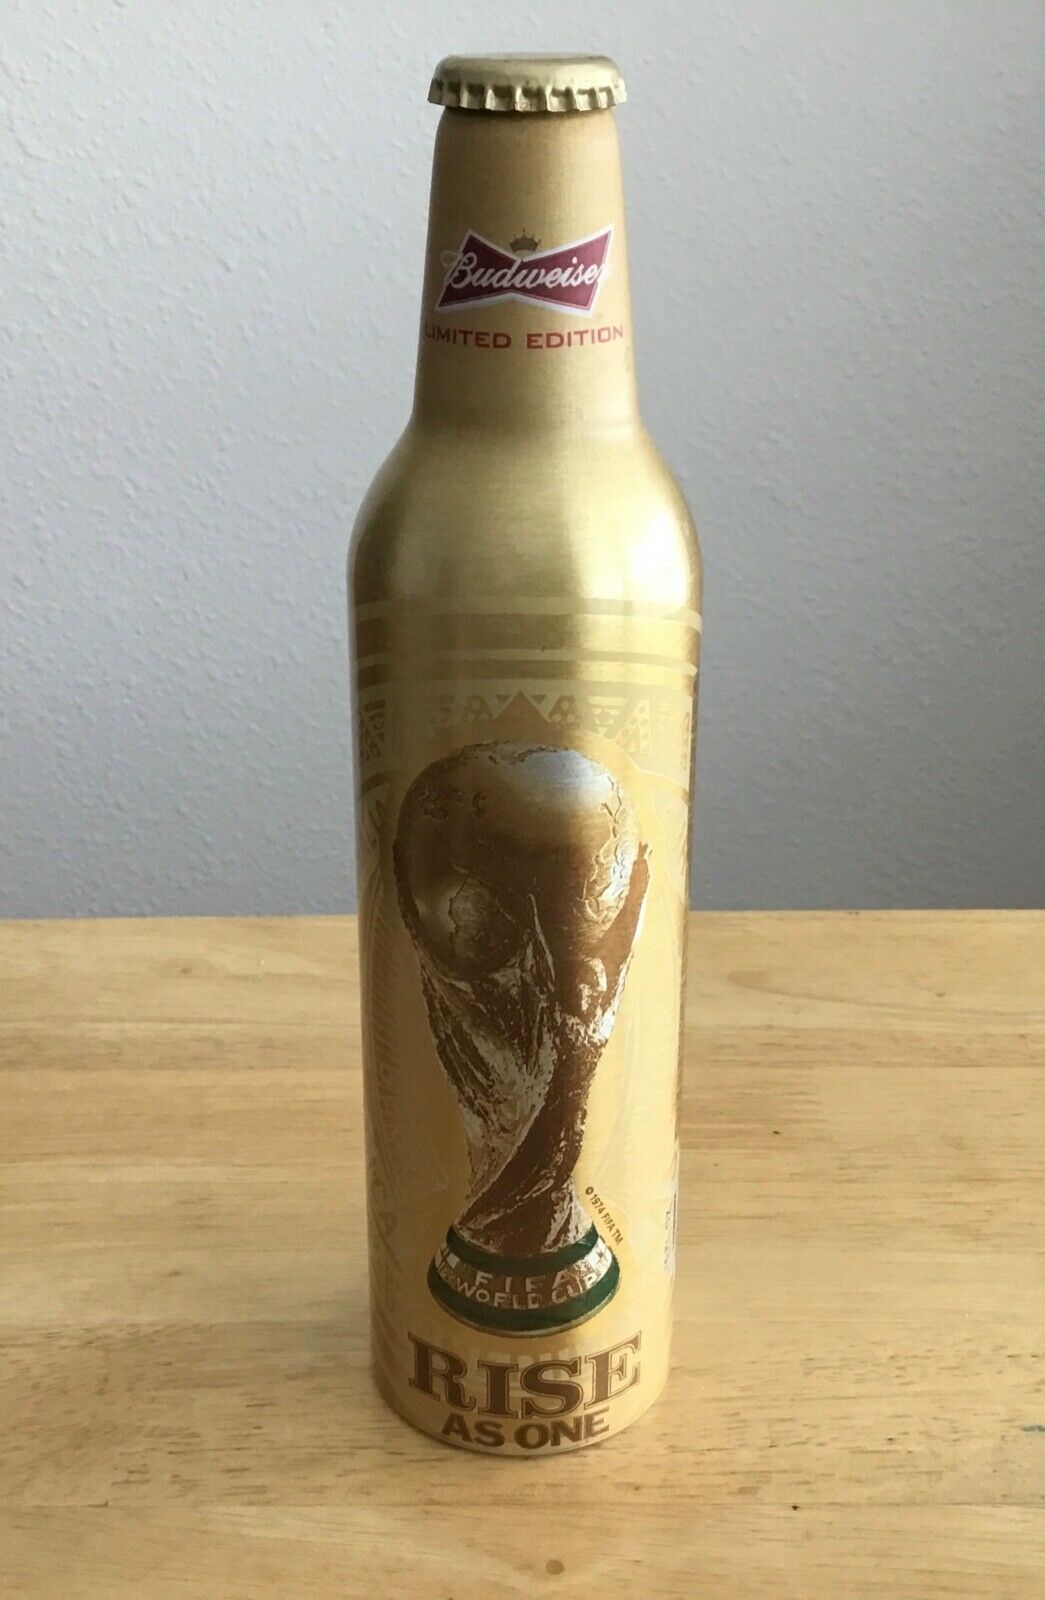 Budweiser Fifa World Cup 2014 Limited Edition 16oz Aluminum Beer Bottle With Cap